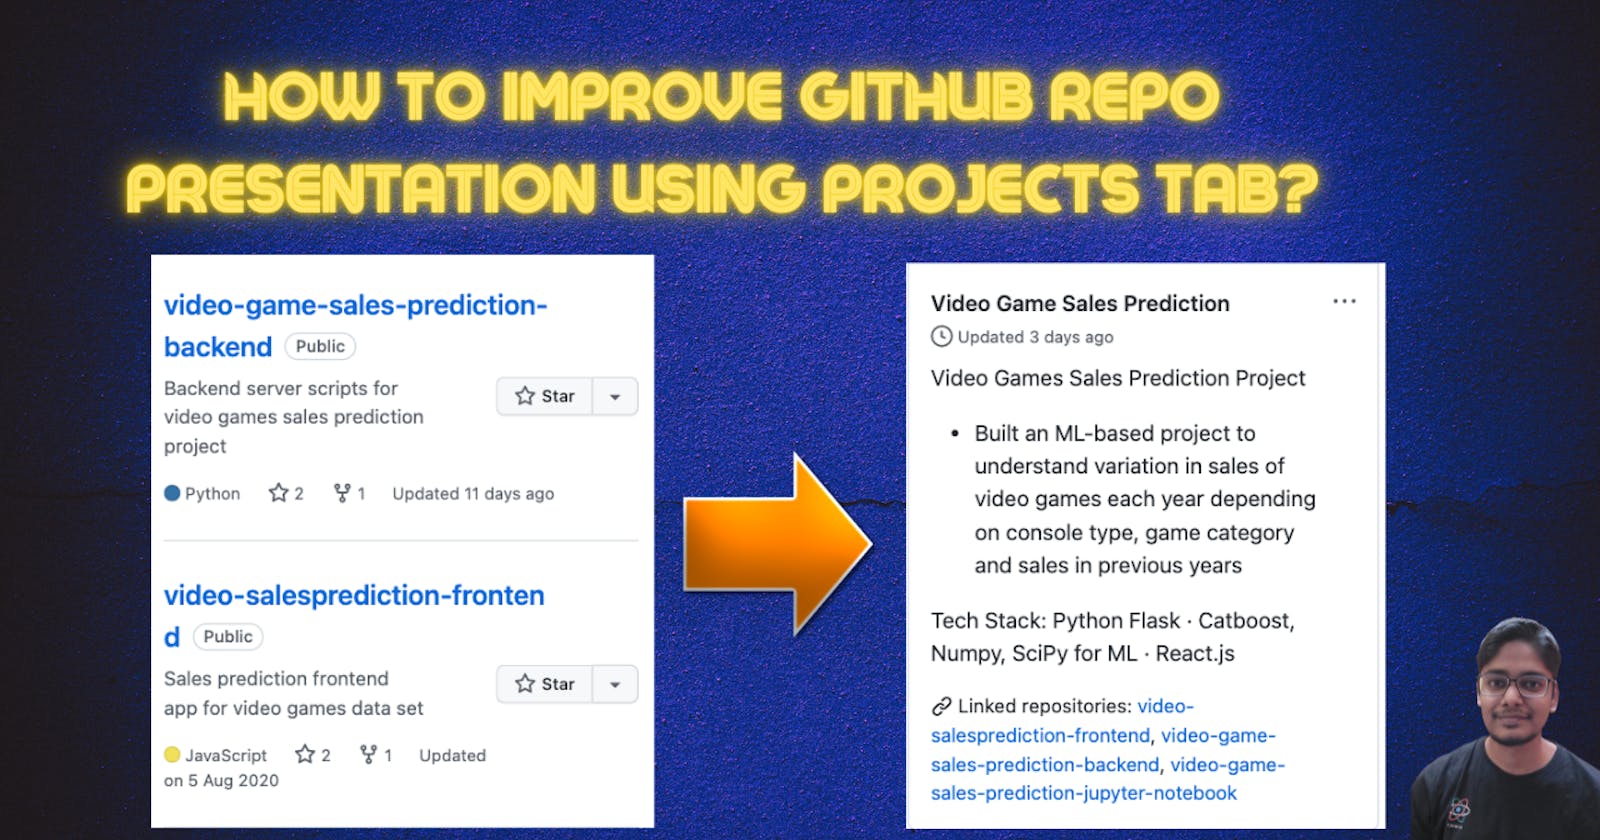 Improving your Github repos presentation using projects feature